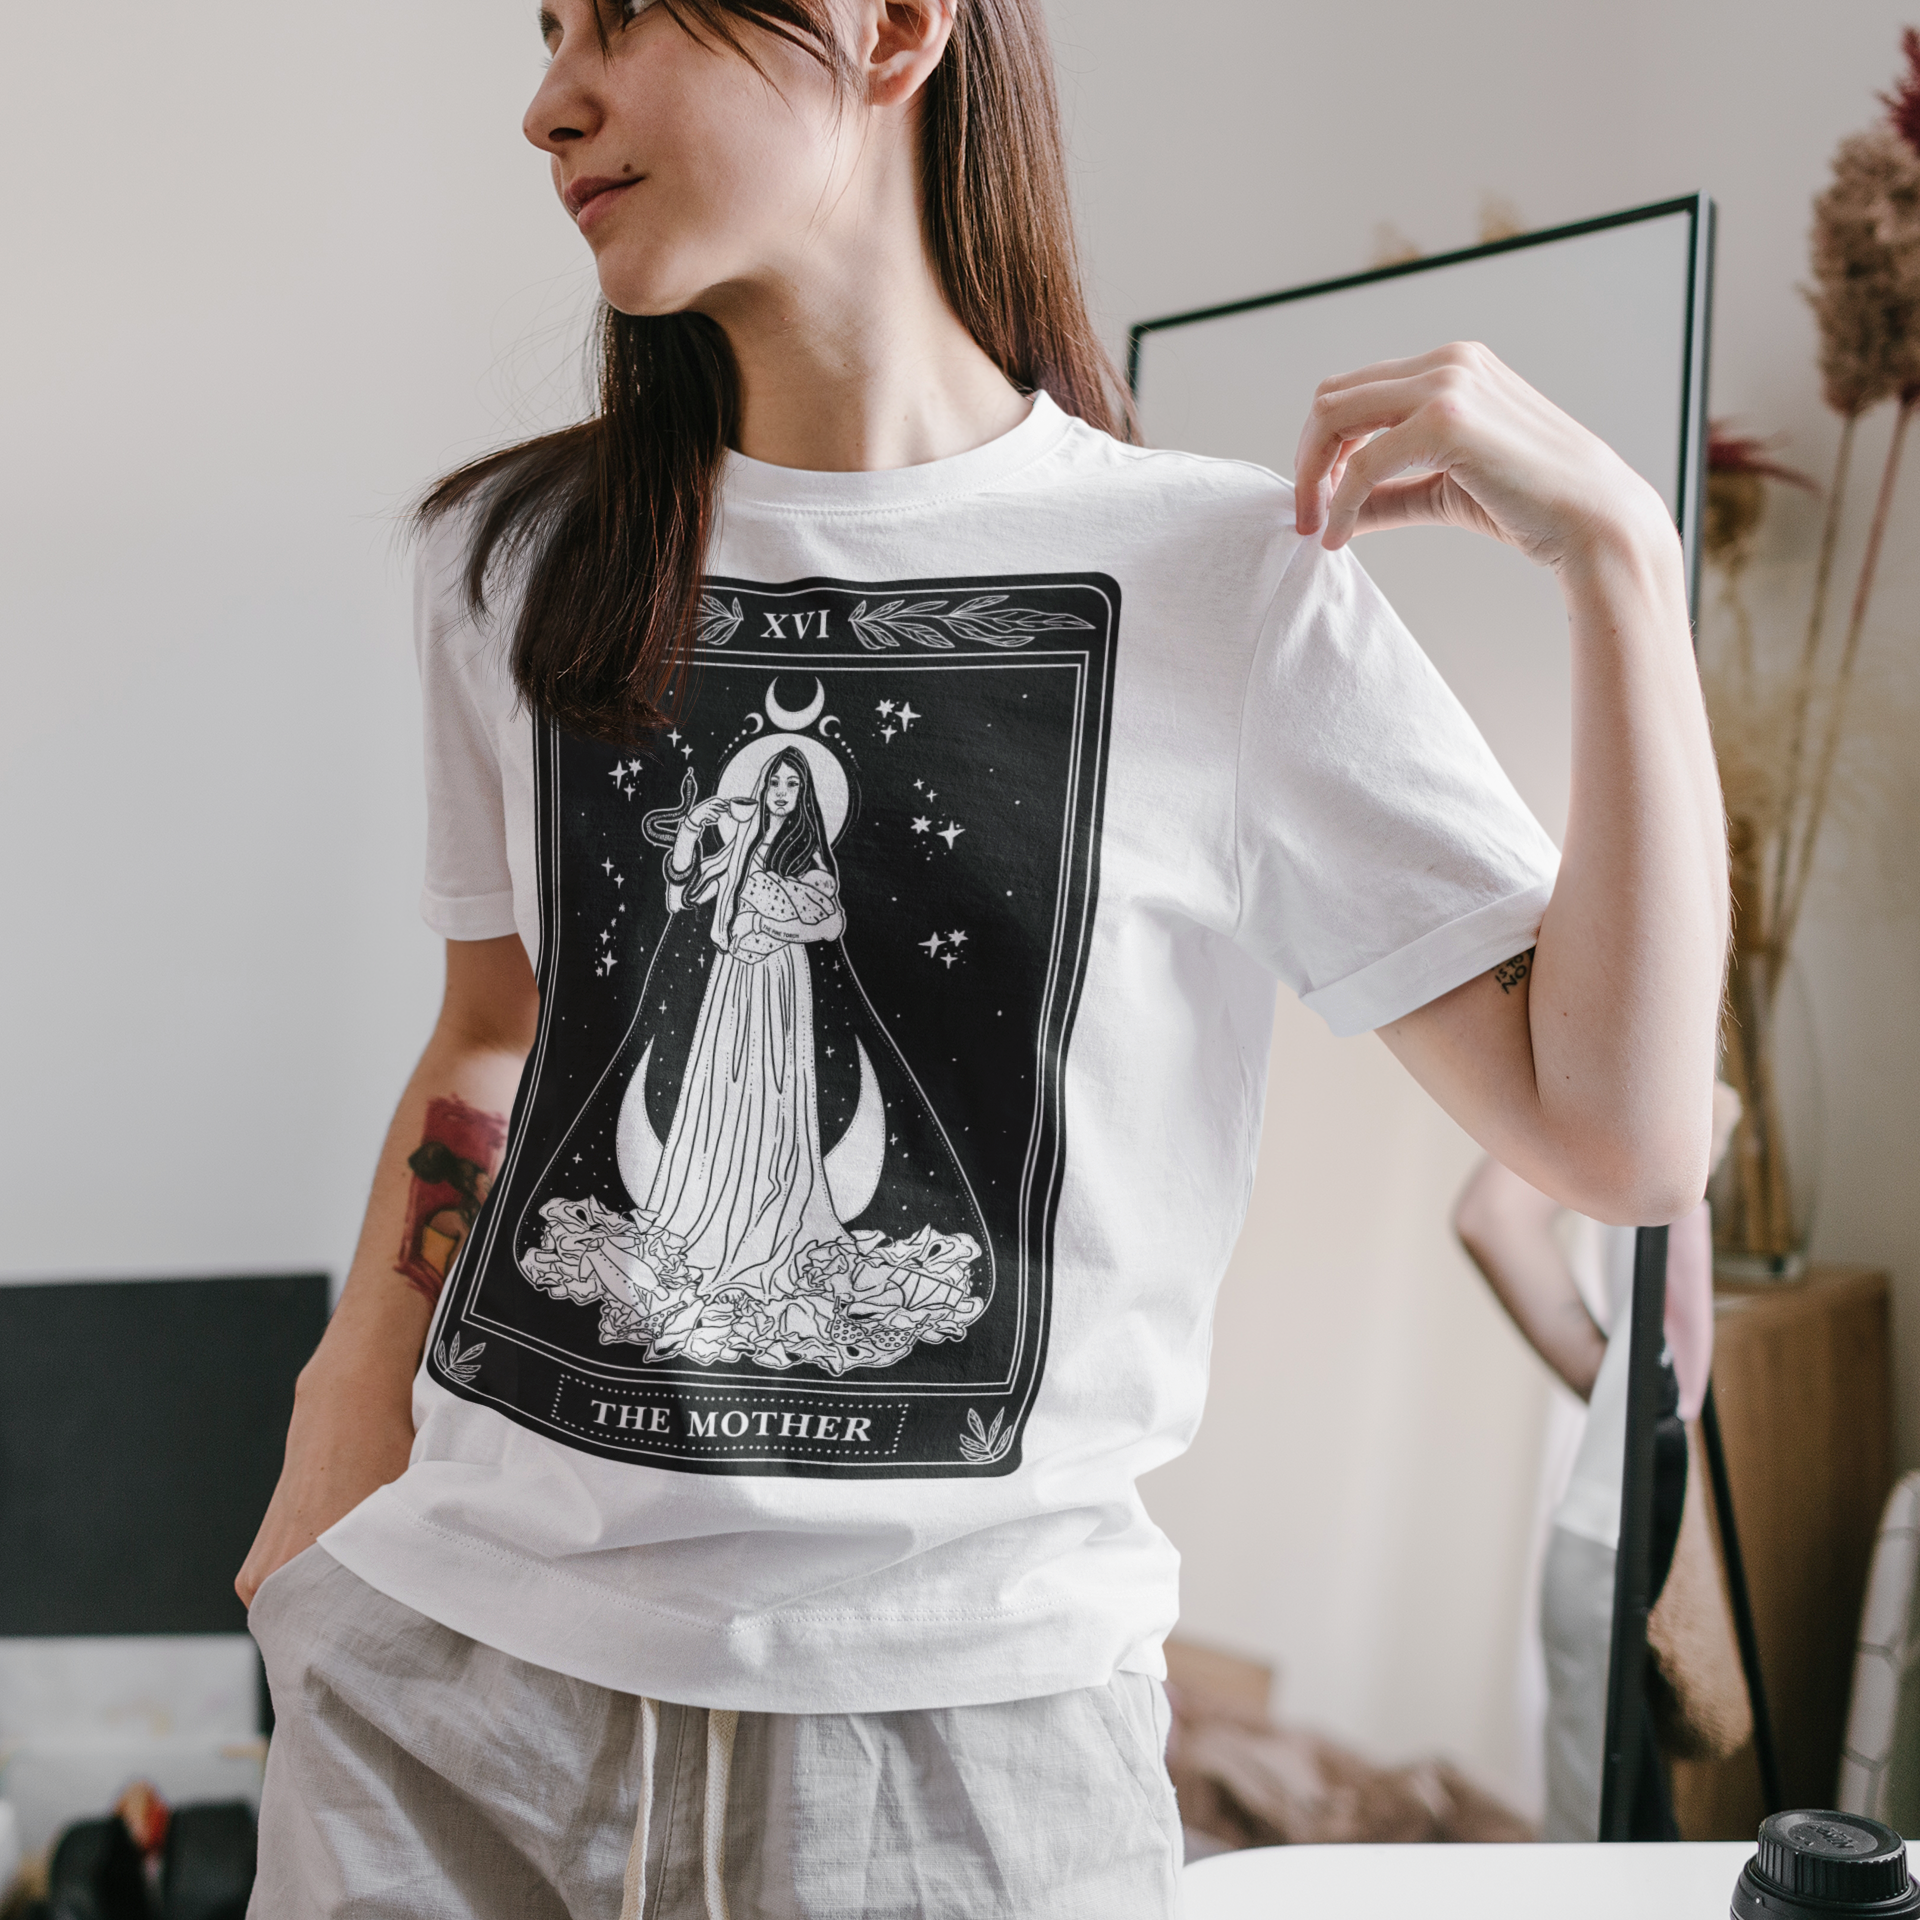 « THE MOTHER » SLOUCHY OR UNISEX TEE